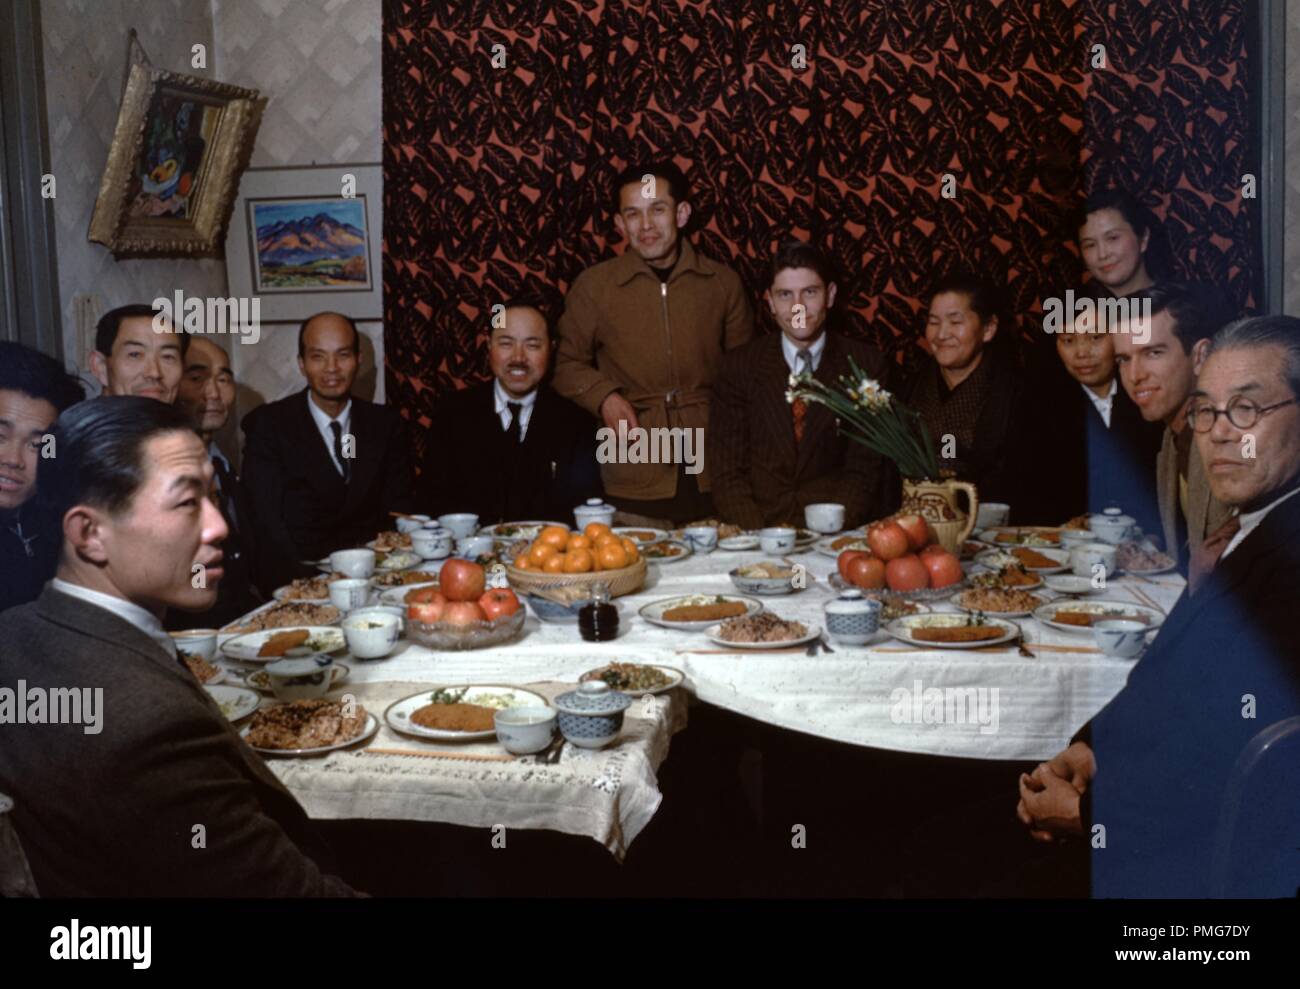 A large group of people, including Caucasian Christian missionaries and Japanese congregants, sit at a table in a small room set with a lavish meal with both Western and Japanese elements, including noodles, apples, and bowls of soy sauce, Japan, 1955. () Stock Photo